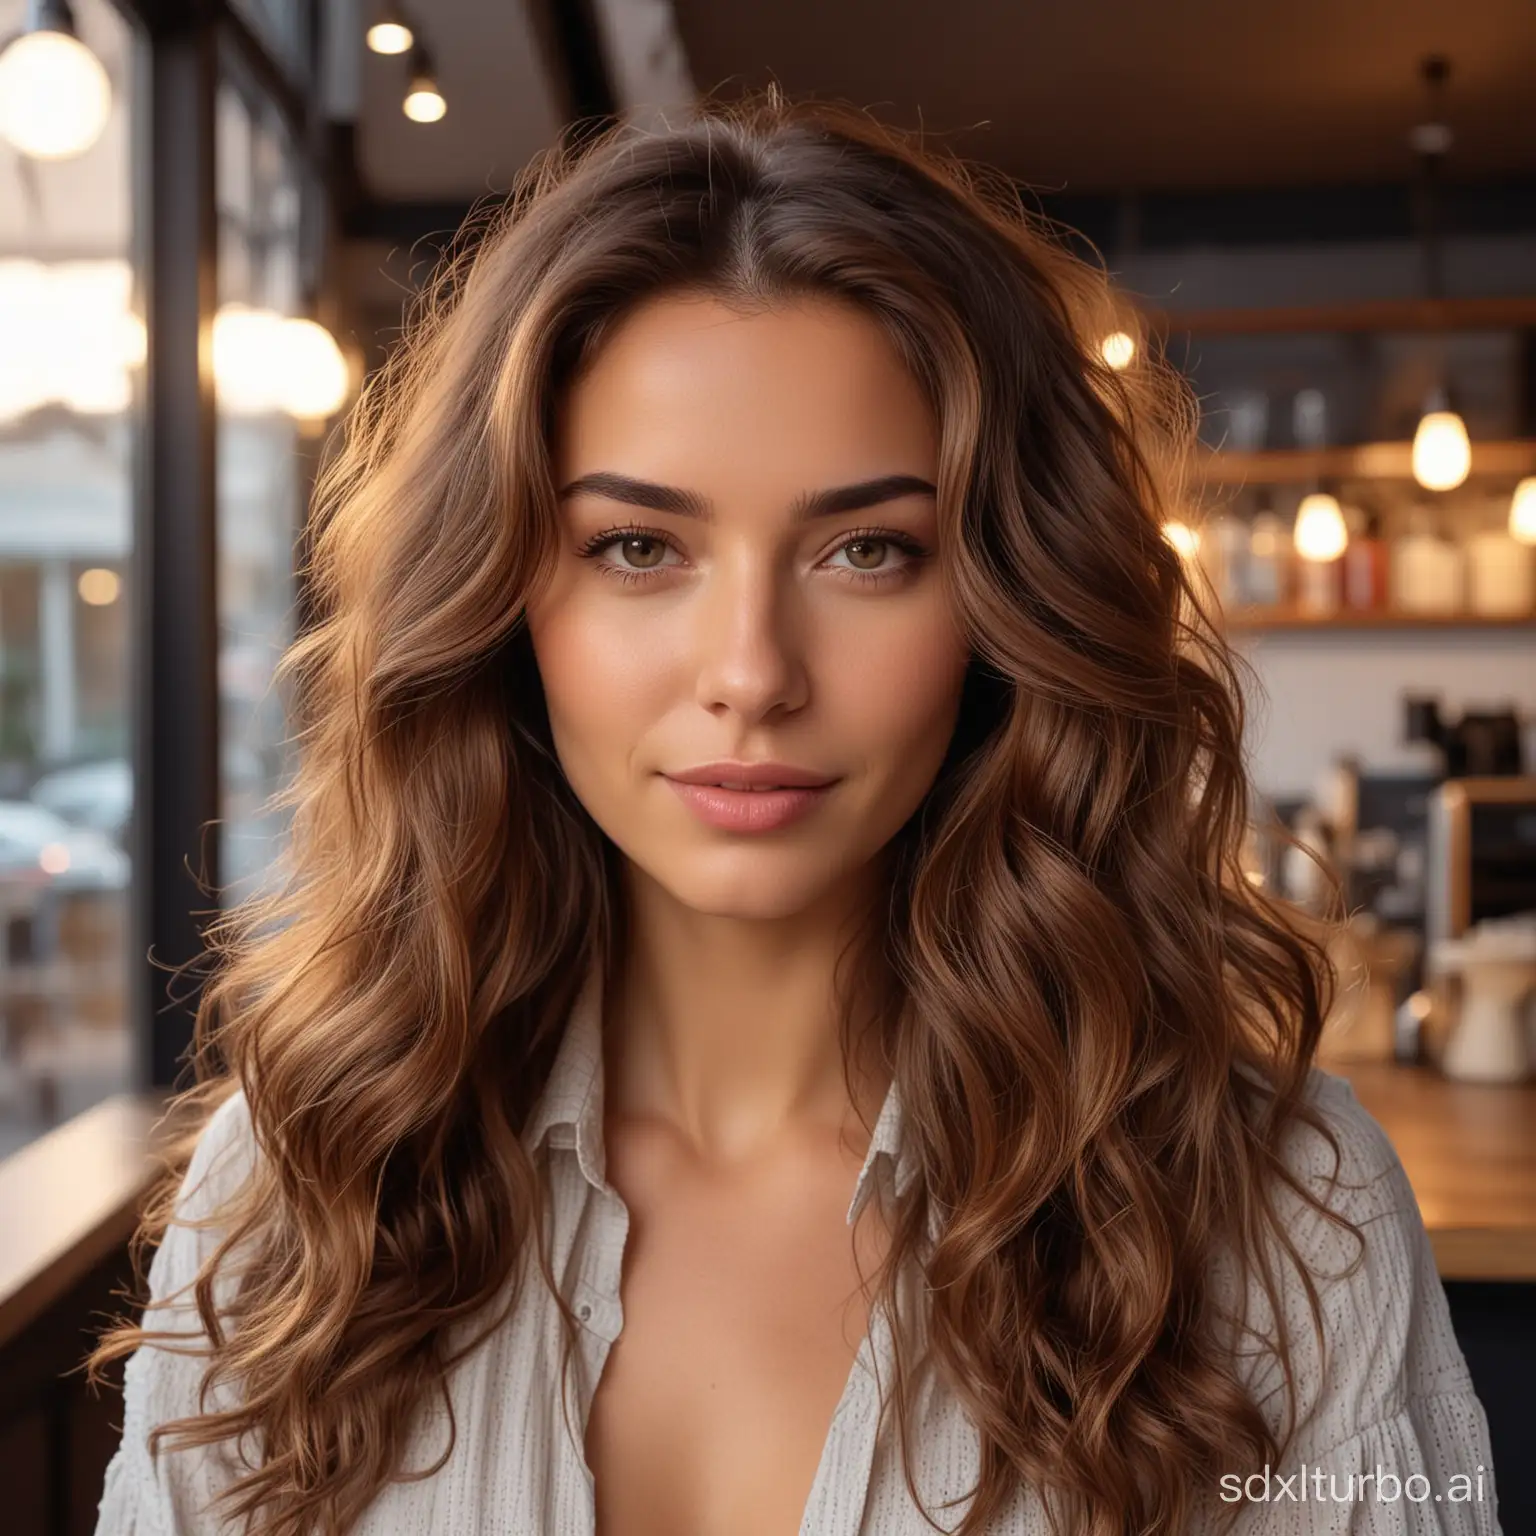 Gorgeous-Woman-with-Wavy-Brown-Hair-in-Coffee-Shop-at-Dusk-High-Quality-8K-Portrait